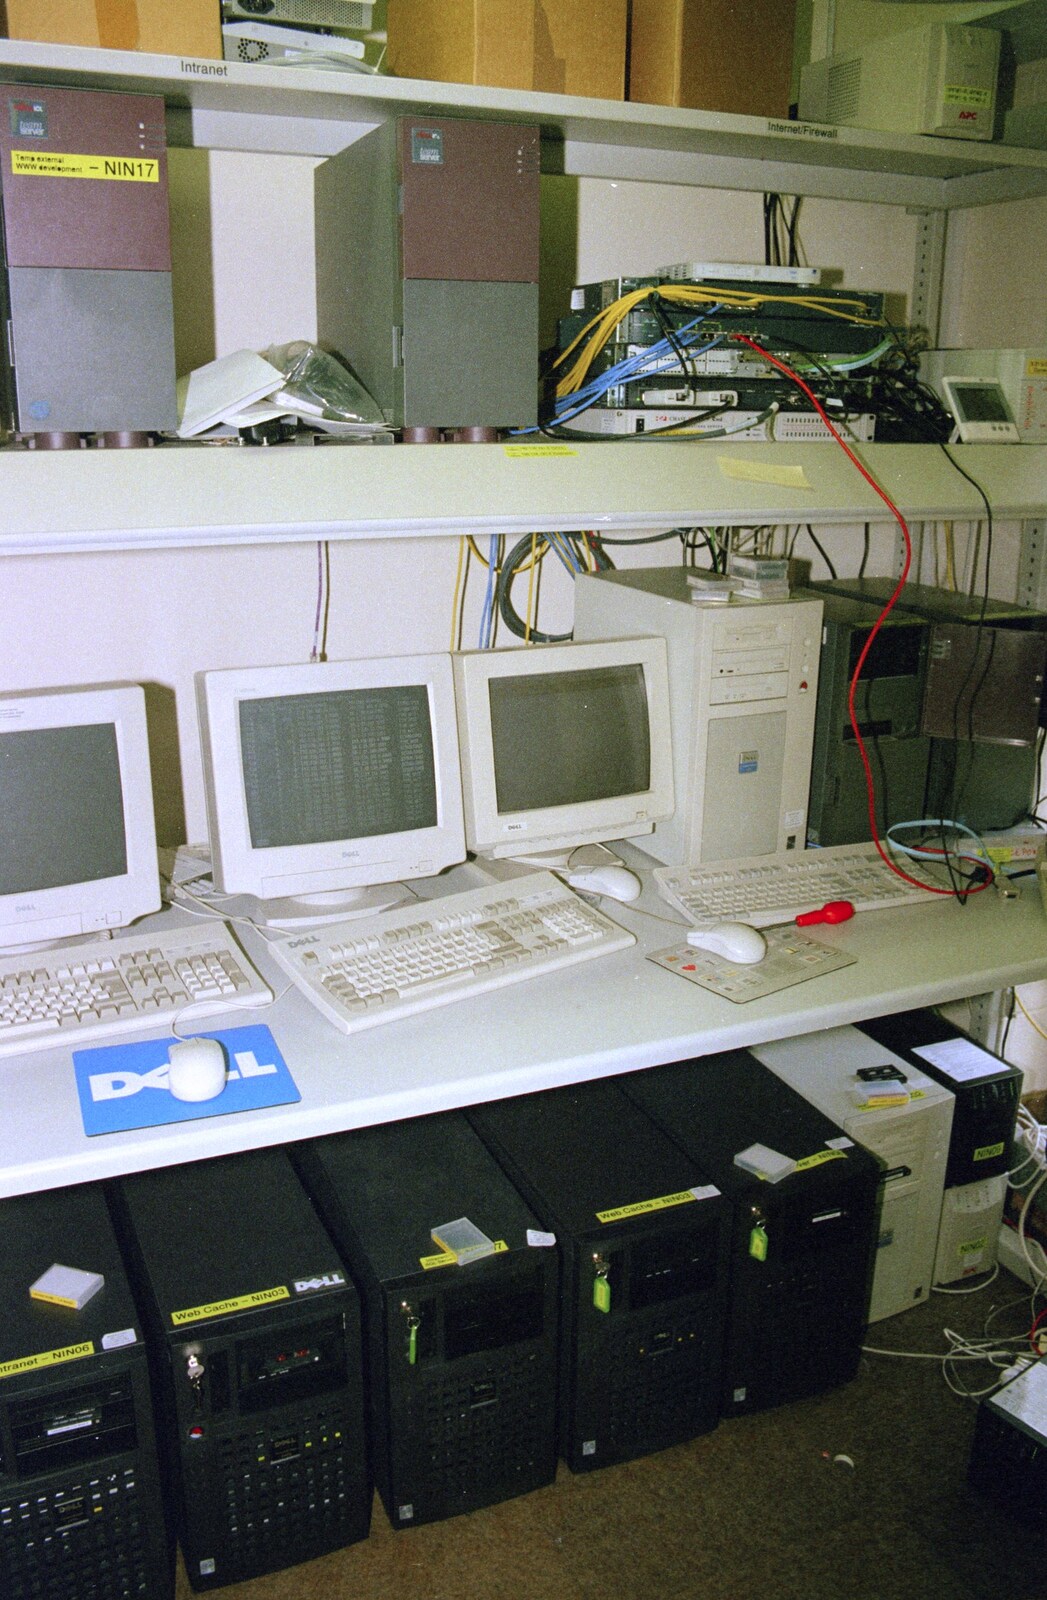 A Last Few Days at CISU, Suffolk County Council, Ipswich - 11th June 2000: The SCC Internet end of the server room